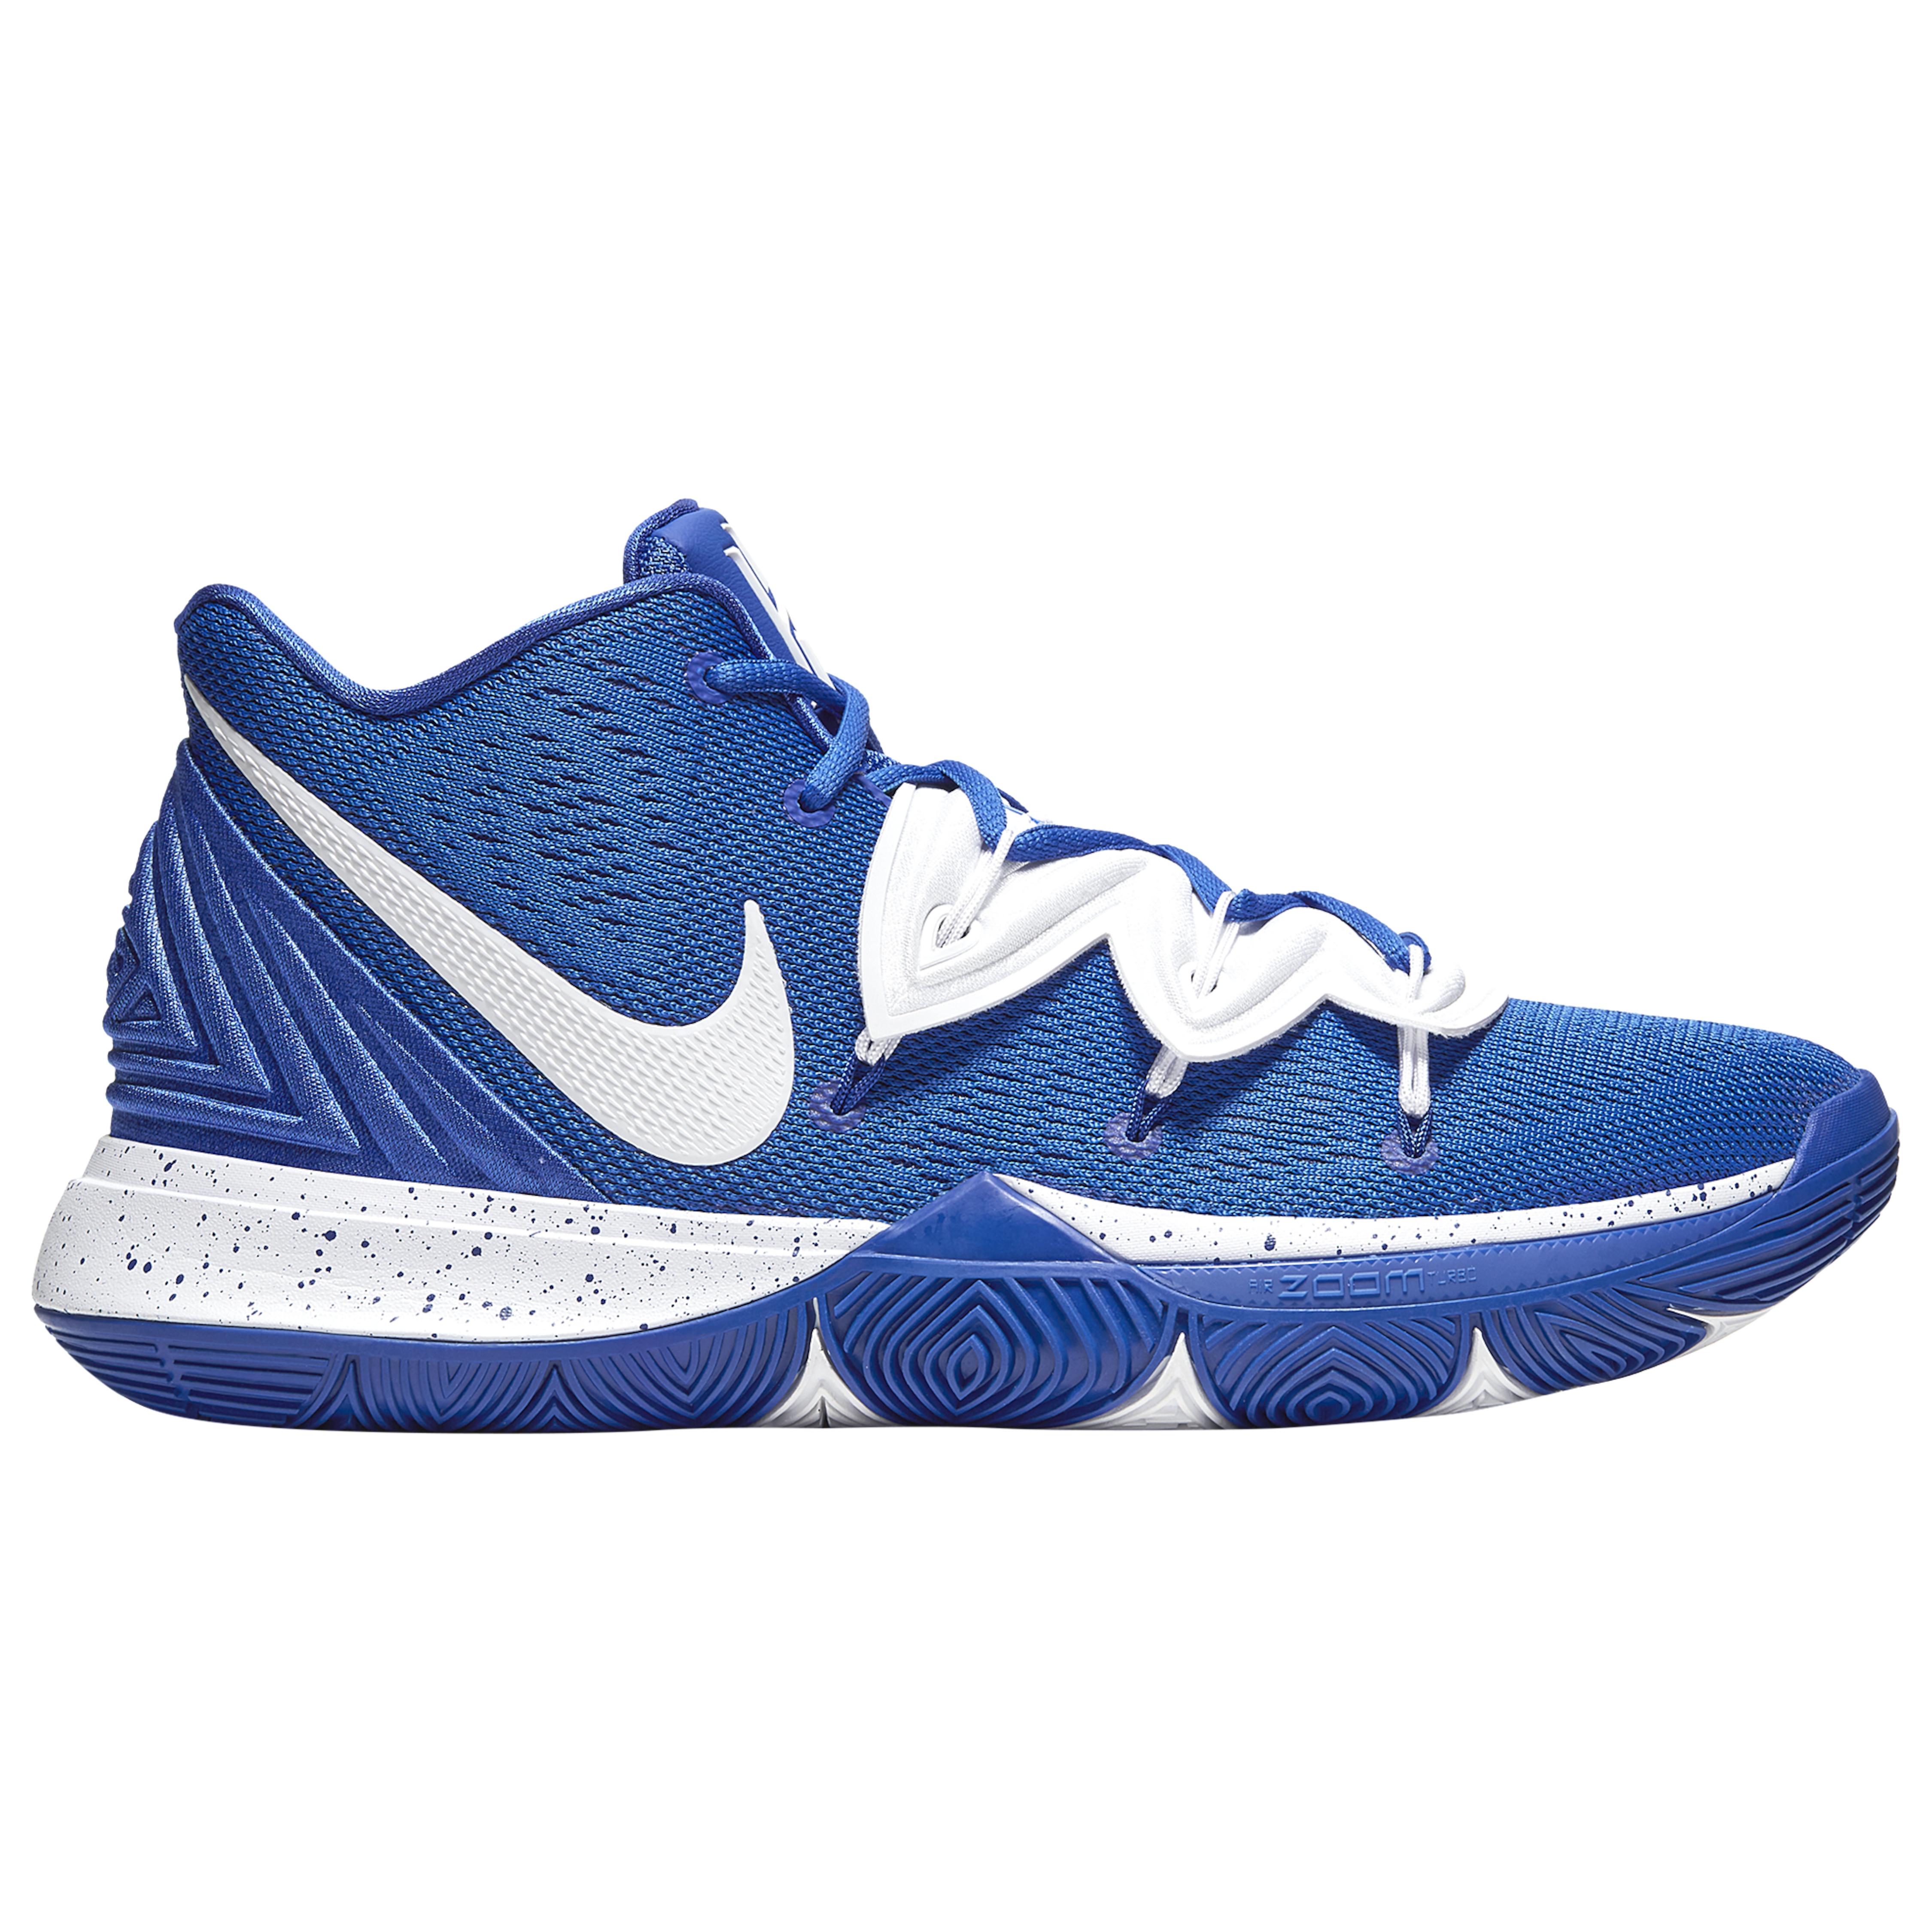 kyrie 5 white and blue